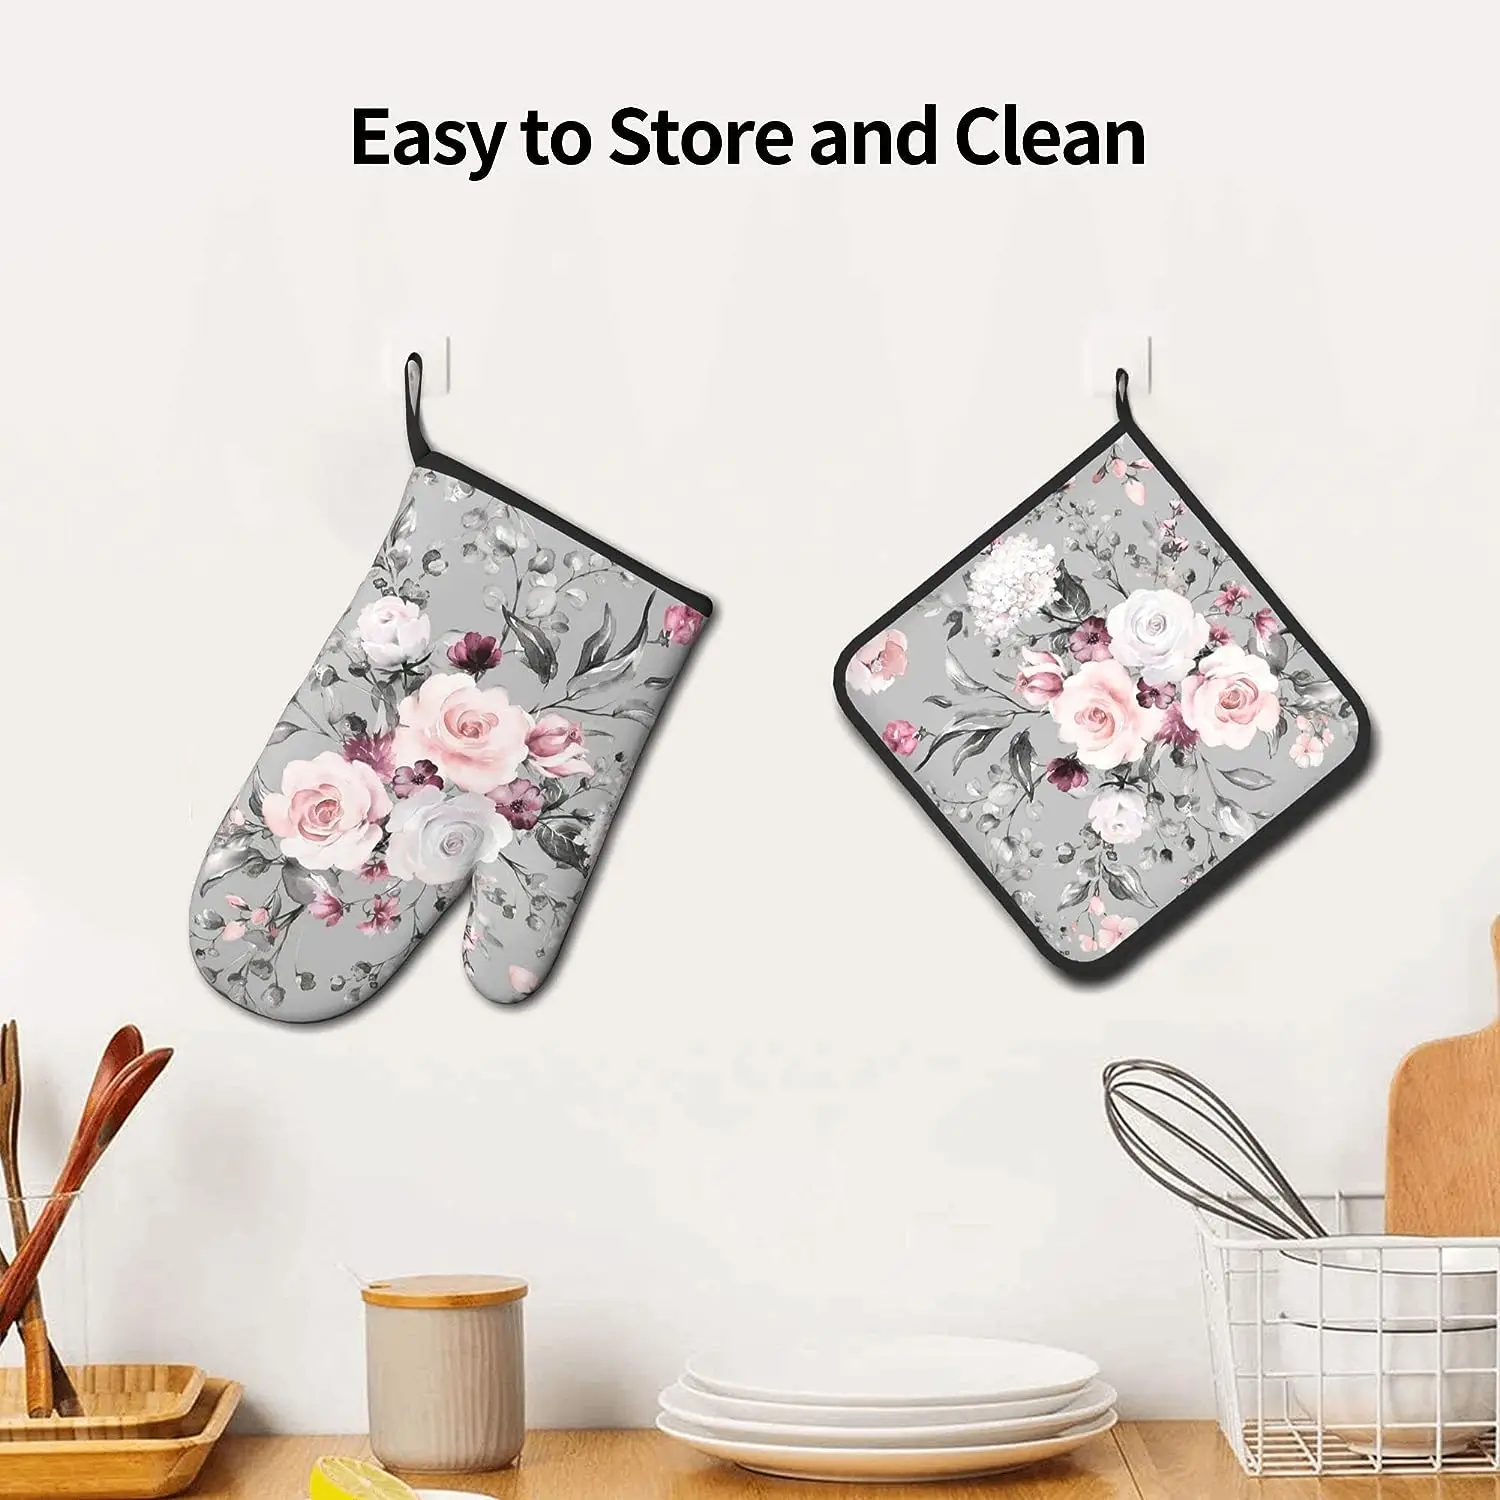 Insulated Cotton Mittens Pot Holders Sets Oven Mitts - China Oven